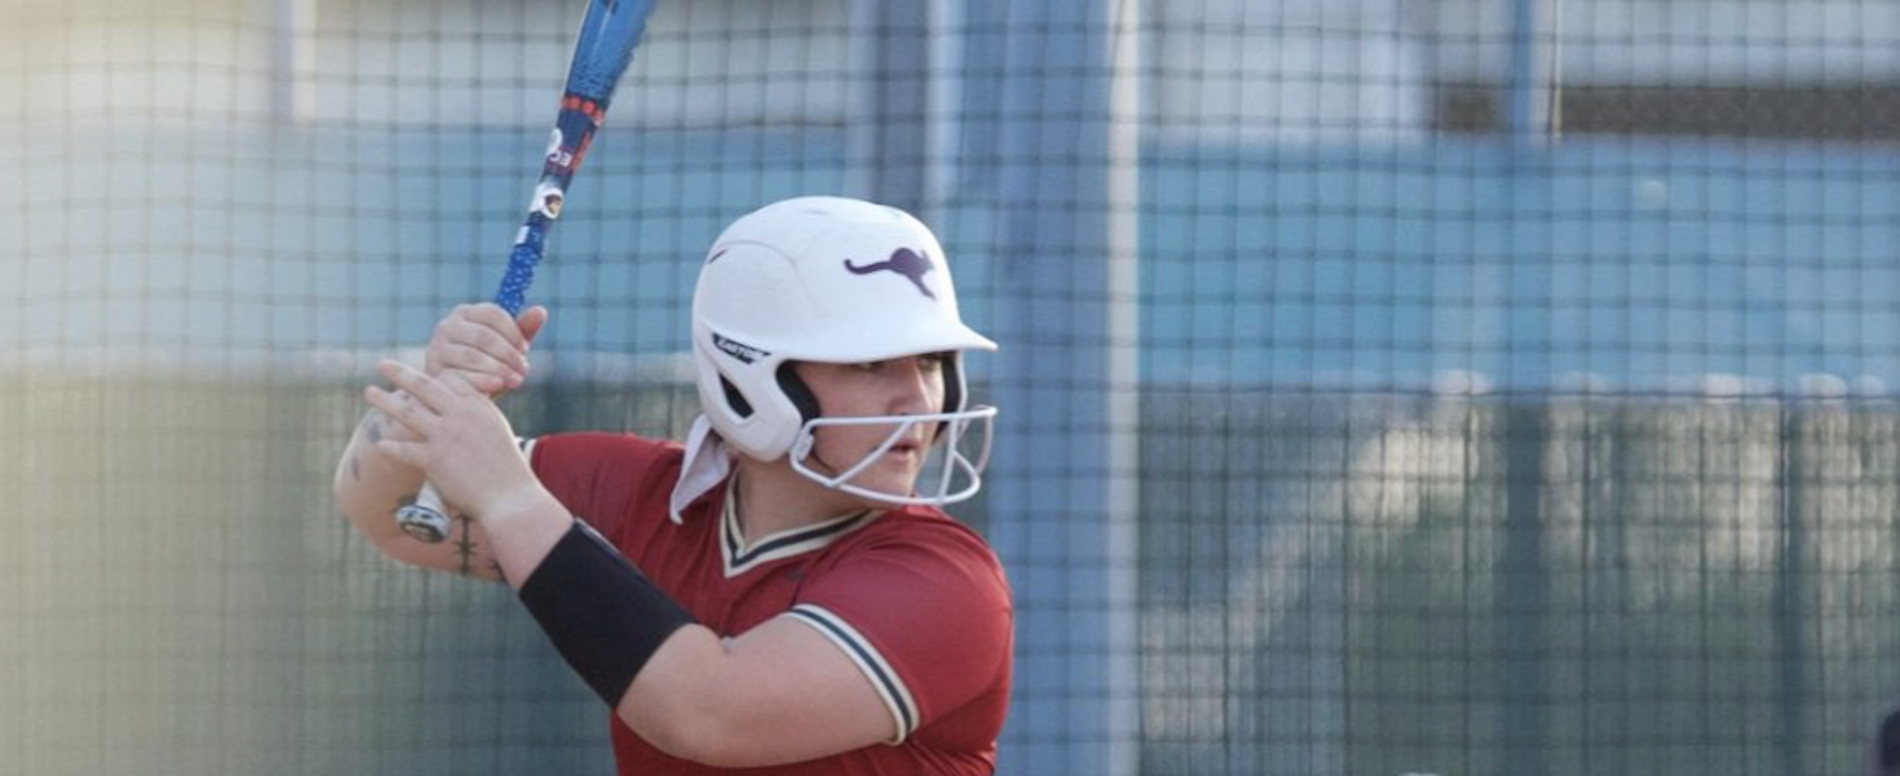 Centenary Tops 'Roo Softball in SCAC Action